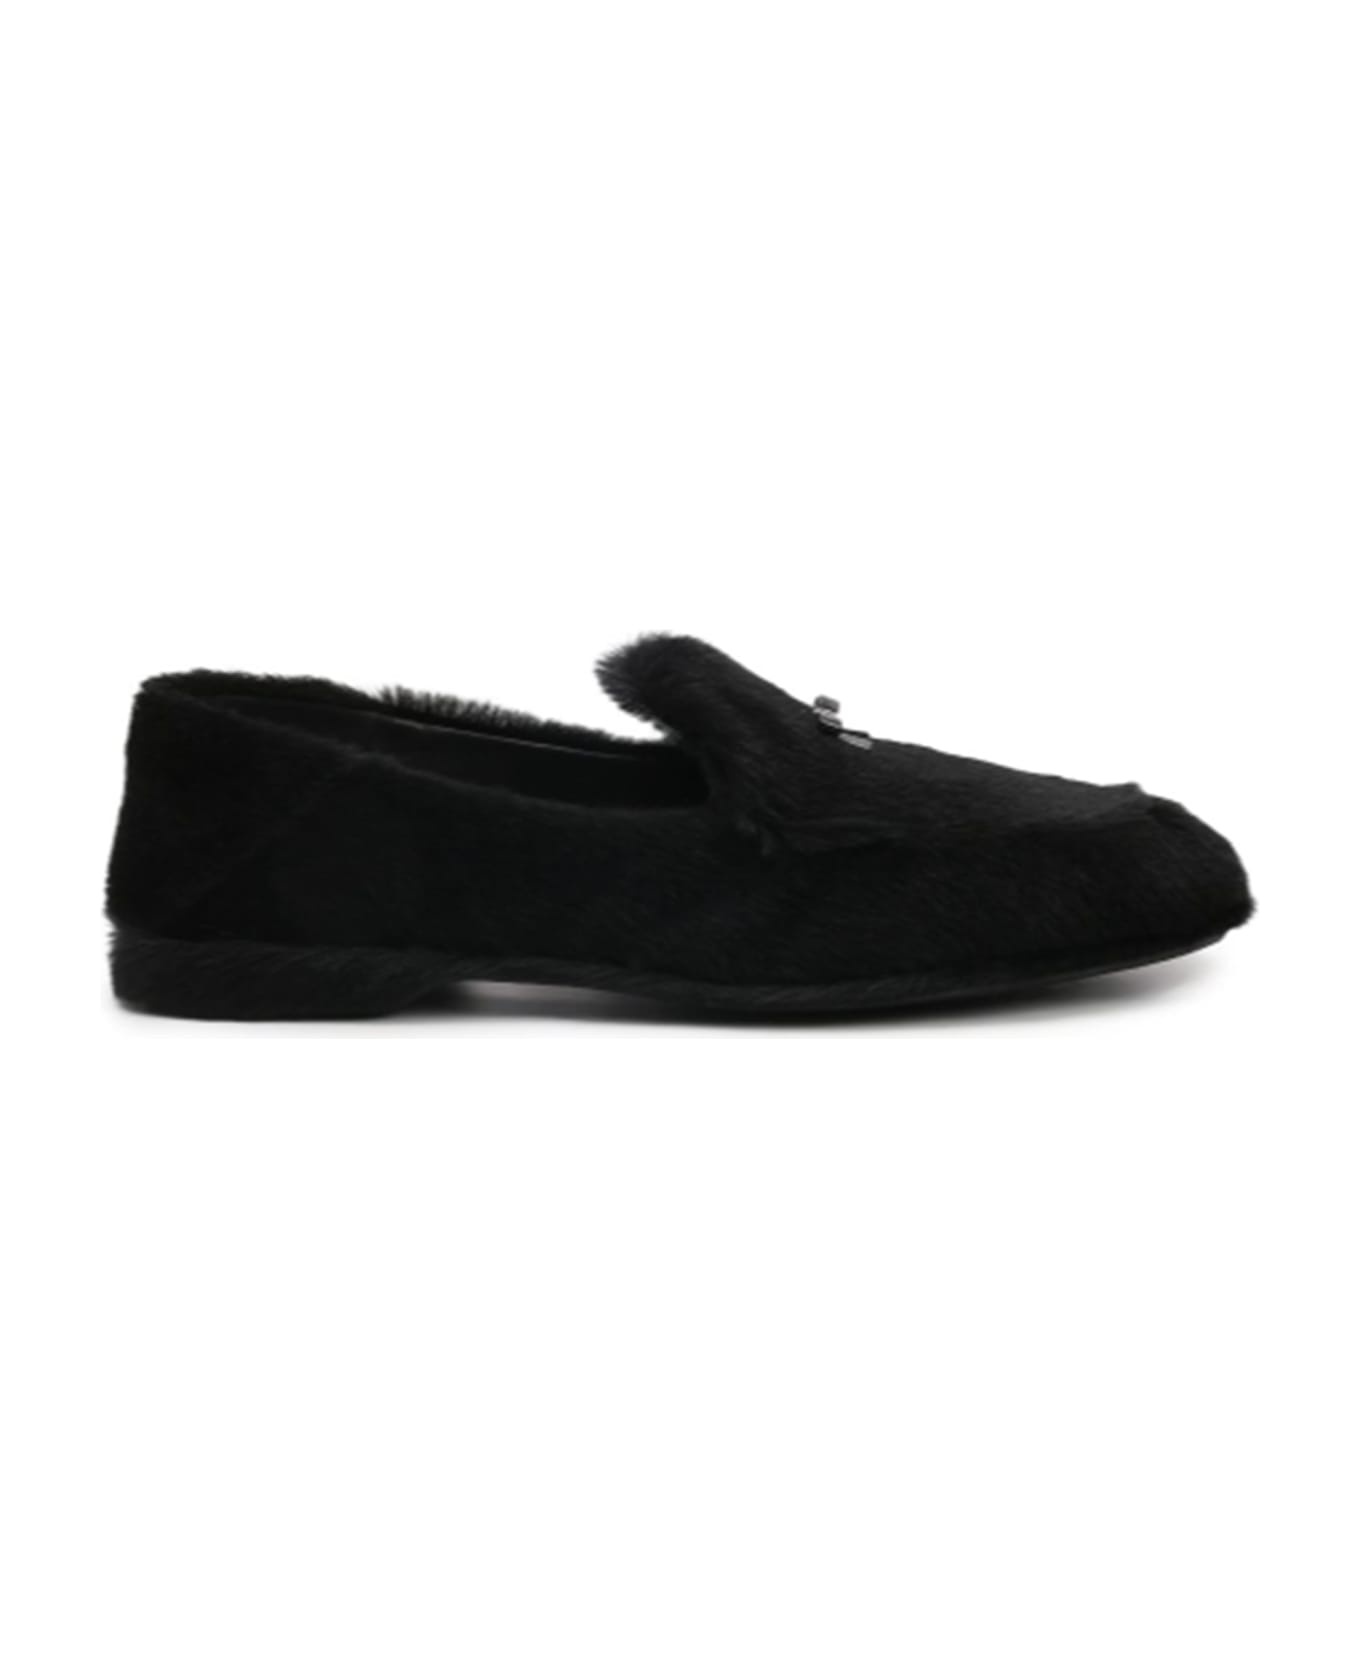 Fur Loafers - 1